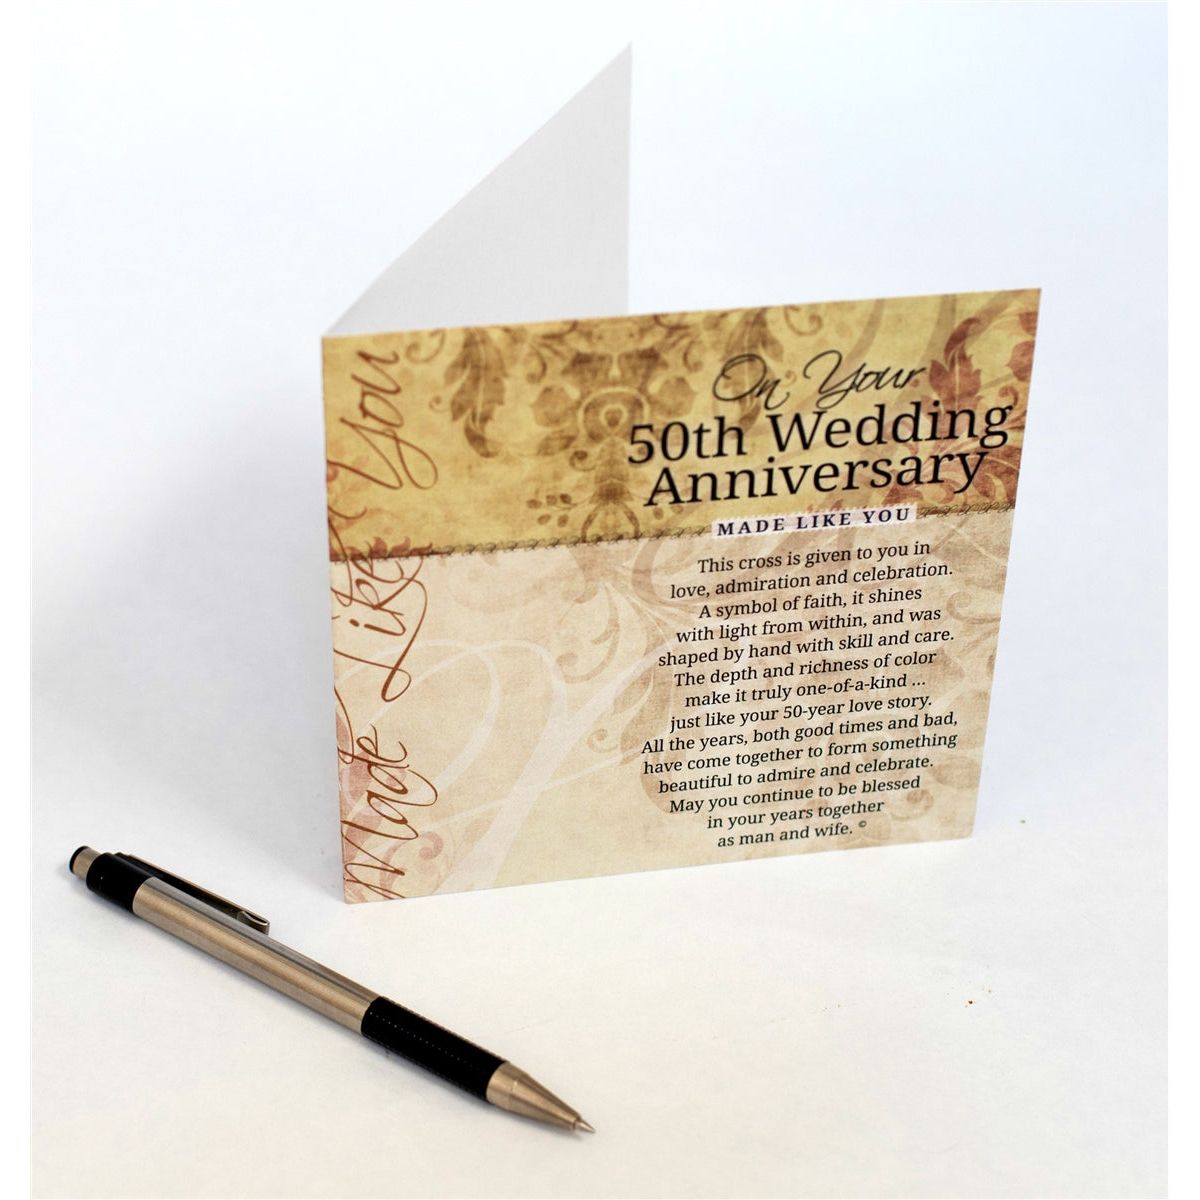 On Your 50th Wedding Anniversary card, open on a table showing the inside of the card with space to write a personal message